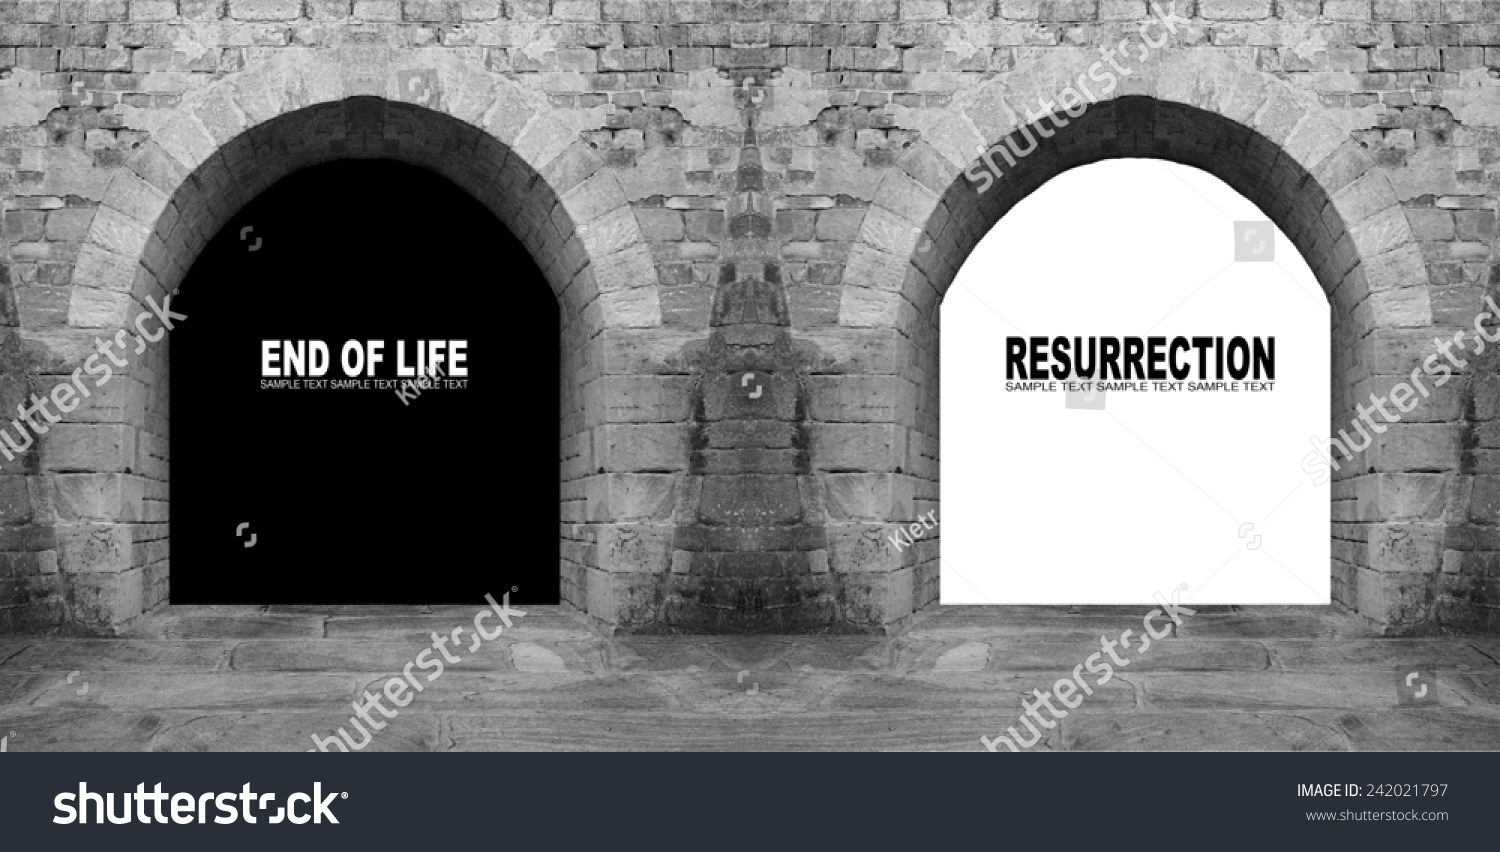 Two Ancient Gates Hell Heaven Space Buildings Landmarks Stock Image